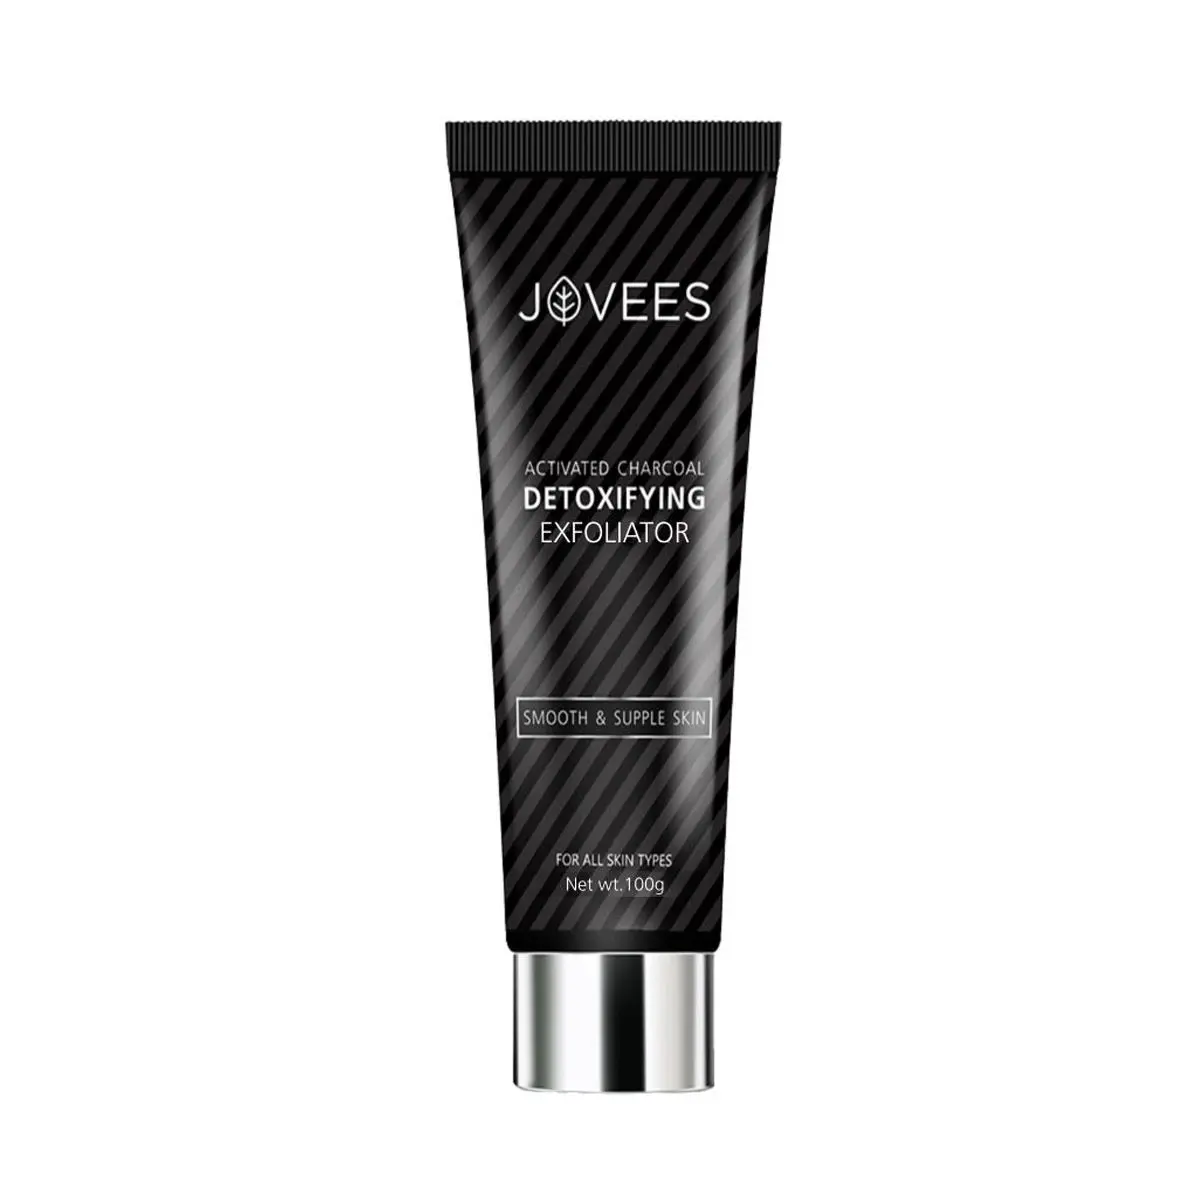 Jovees activated charcoal Detoxifying  Exfoliator smooth & supple skin (100 g)